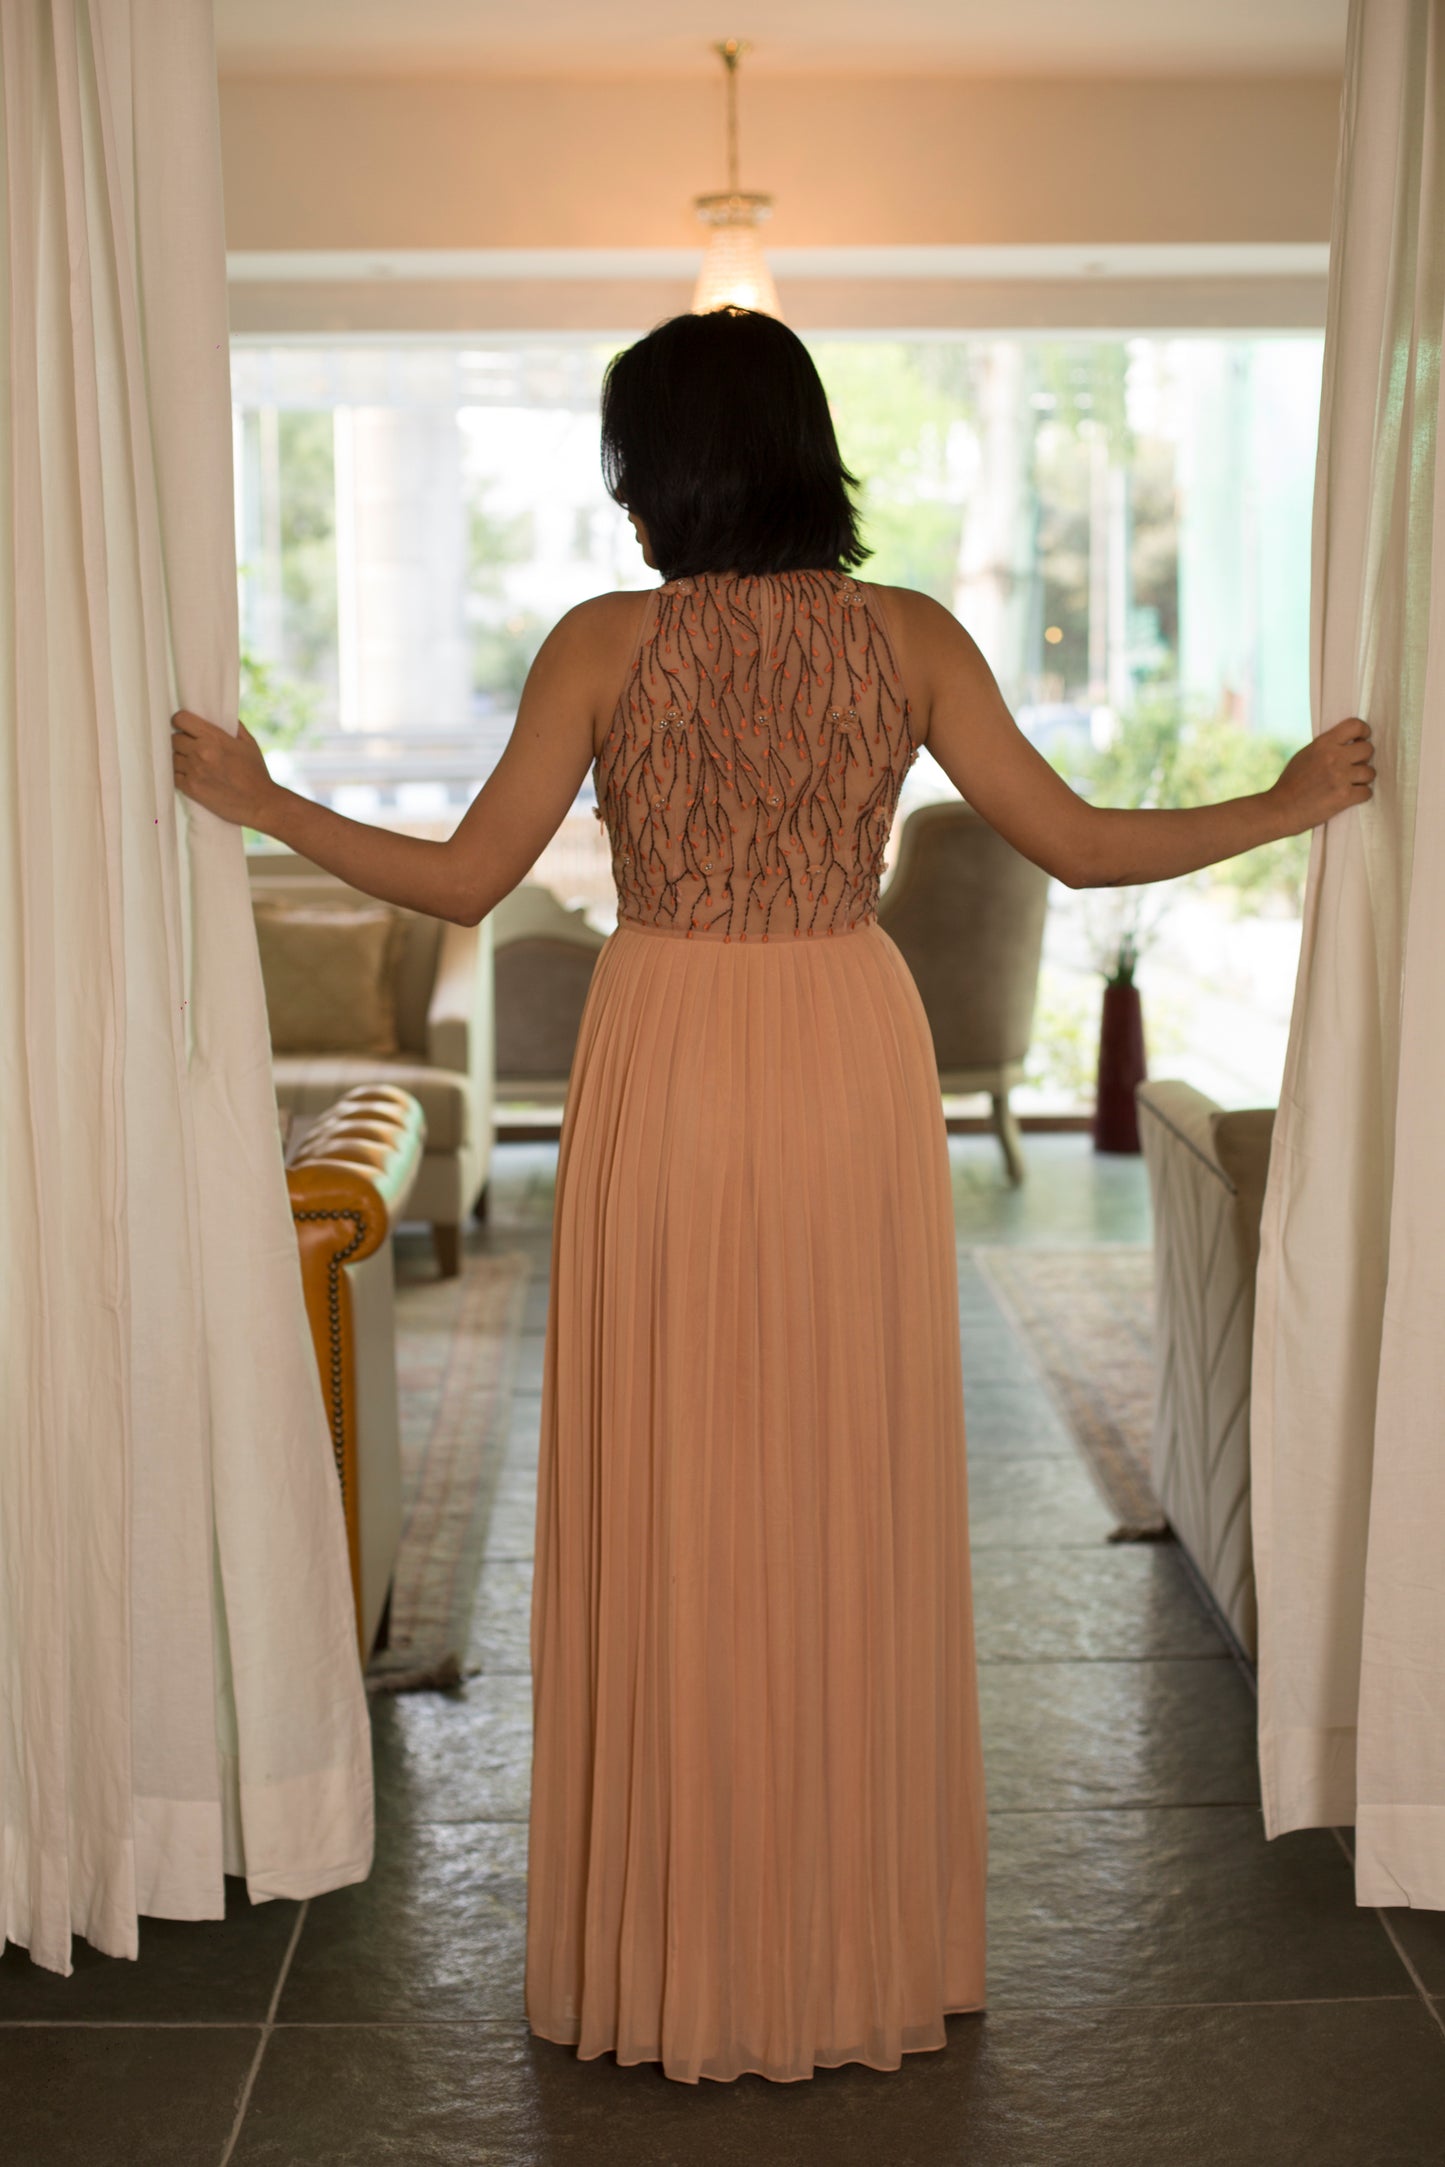 Embroidered pleated gown